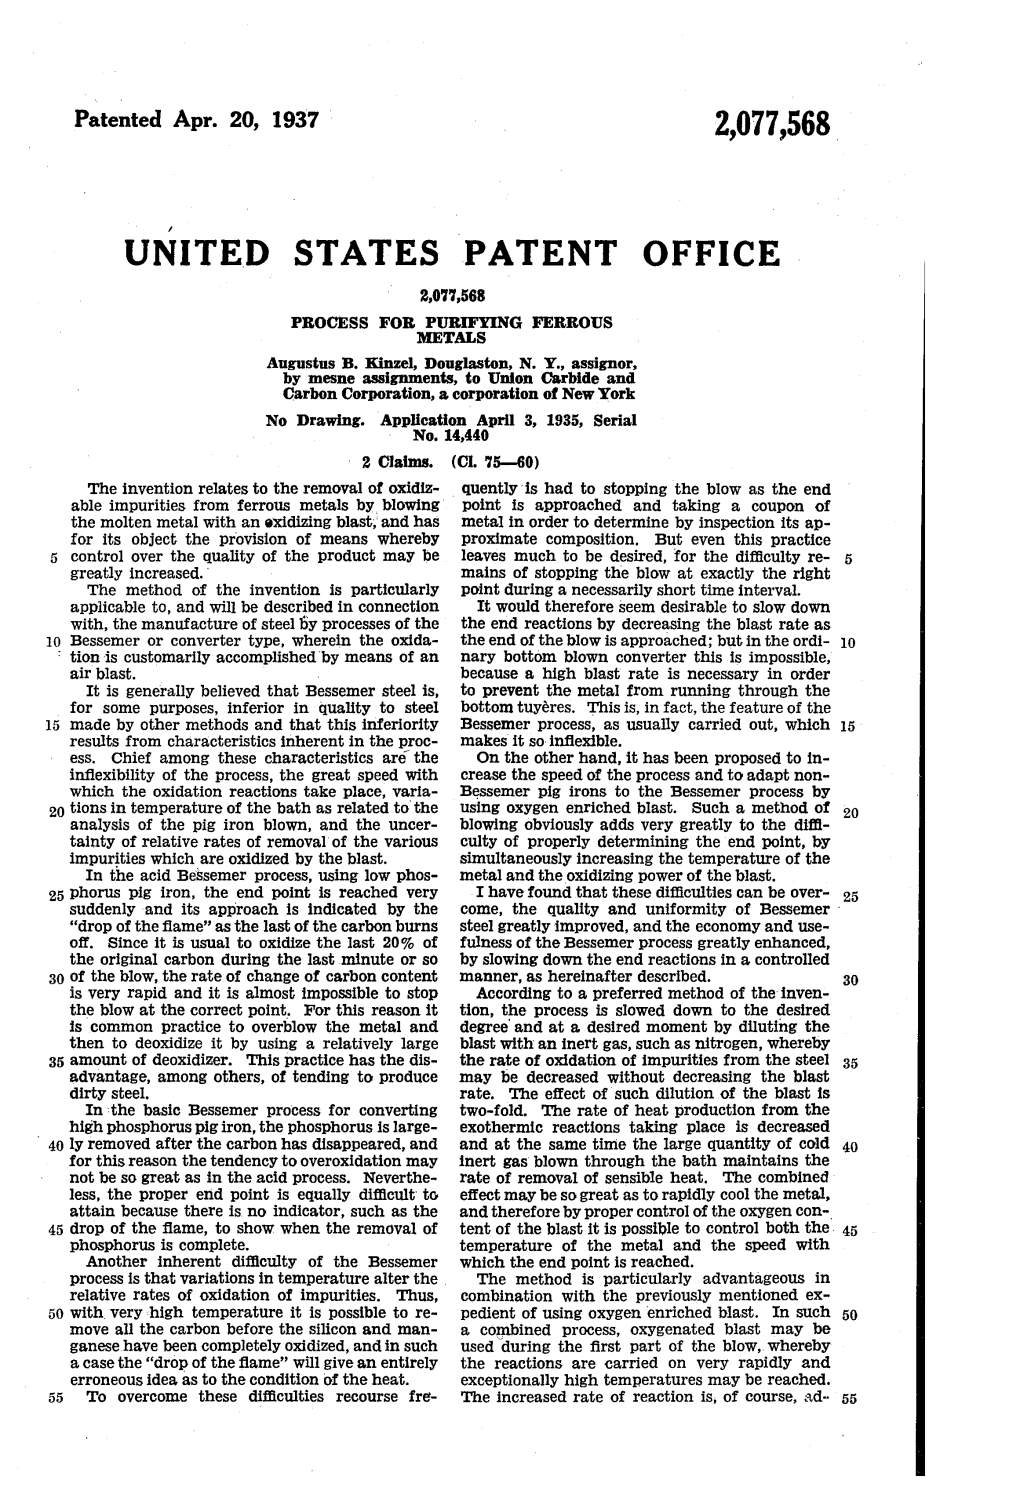 United States Patent Office 2,07,568 Process for Purfying